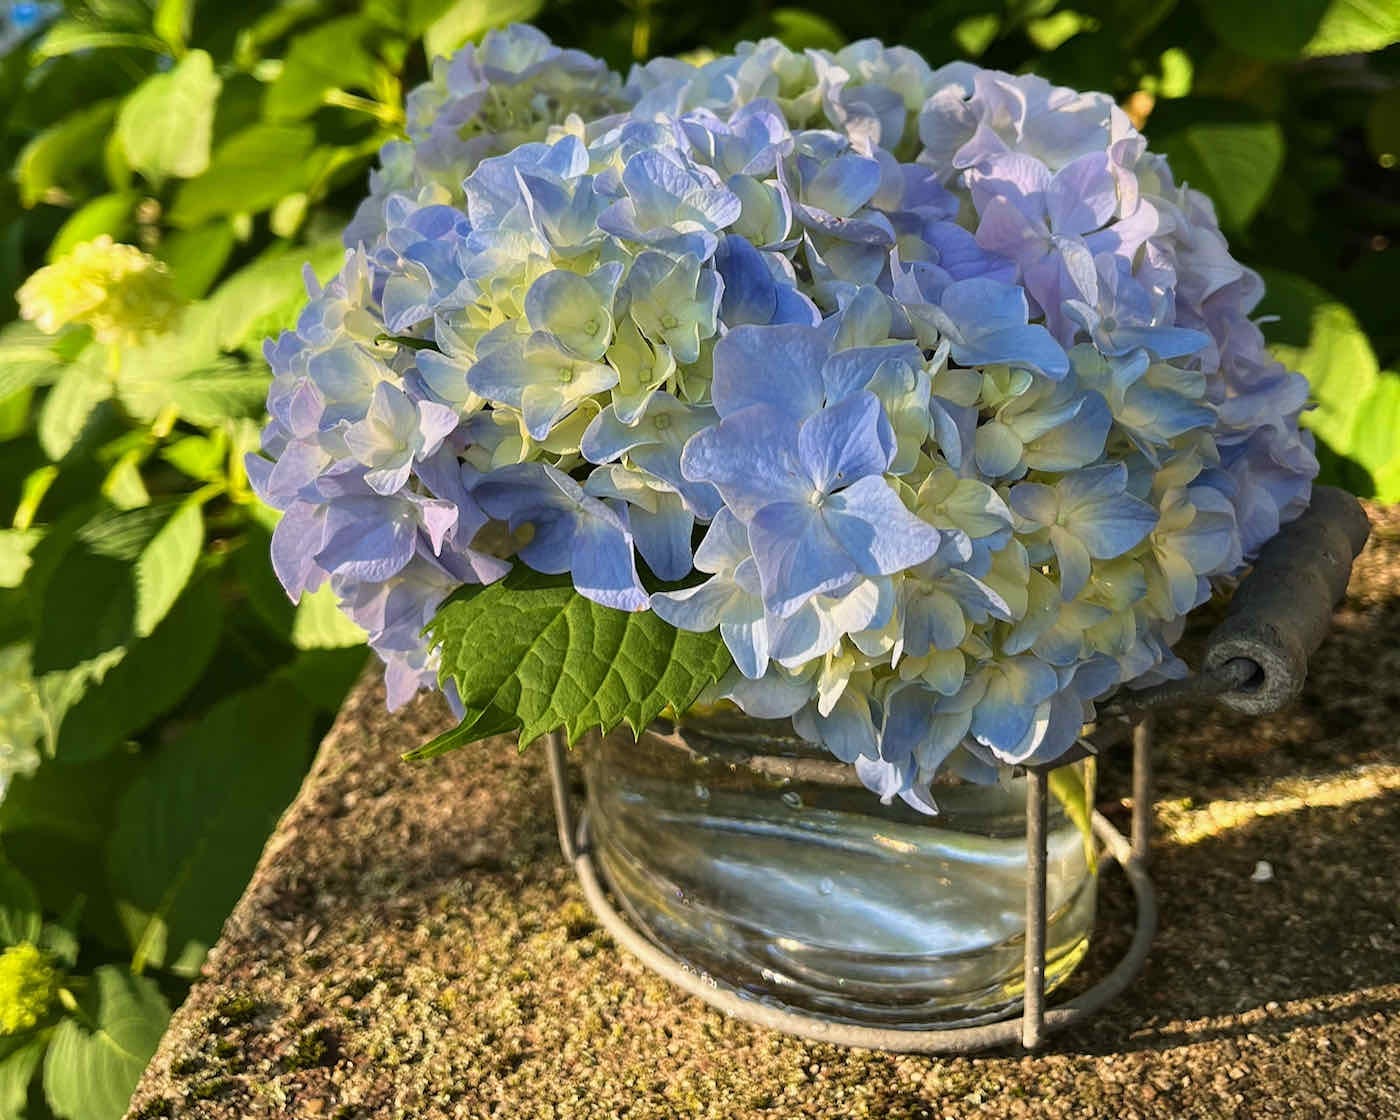 Freshly cut hydrangea with blue, white, and purple petals in a glass vase